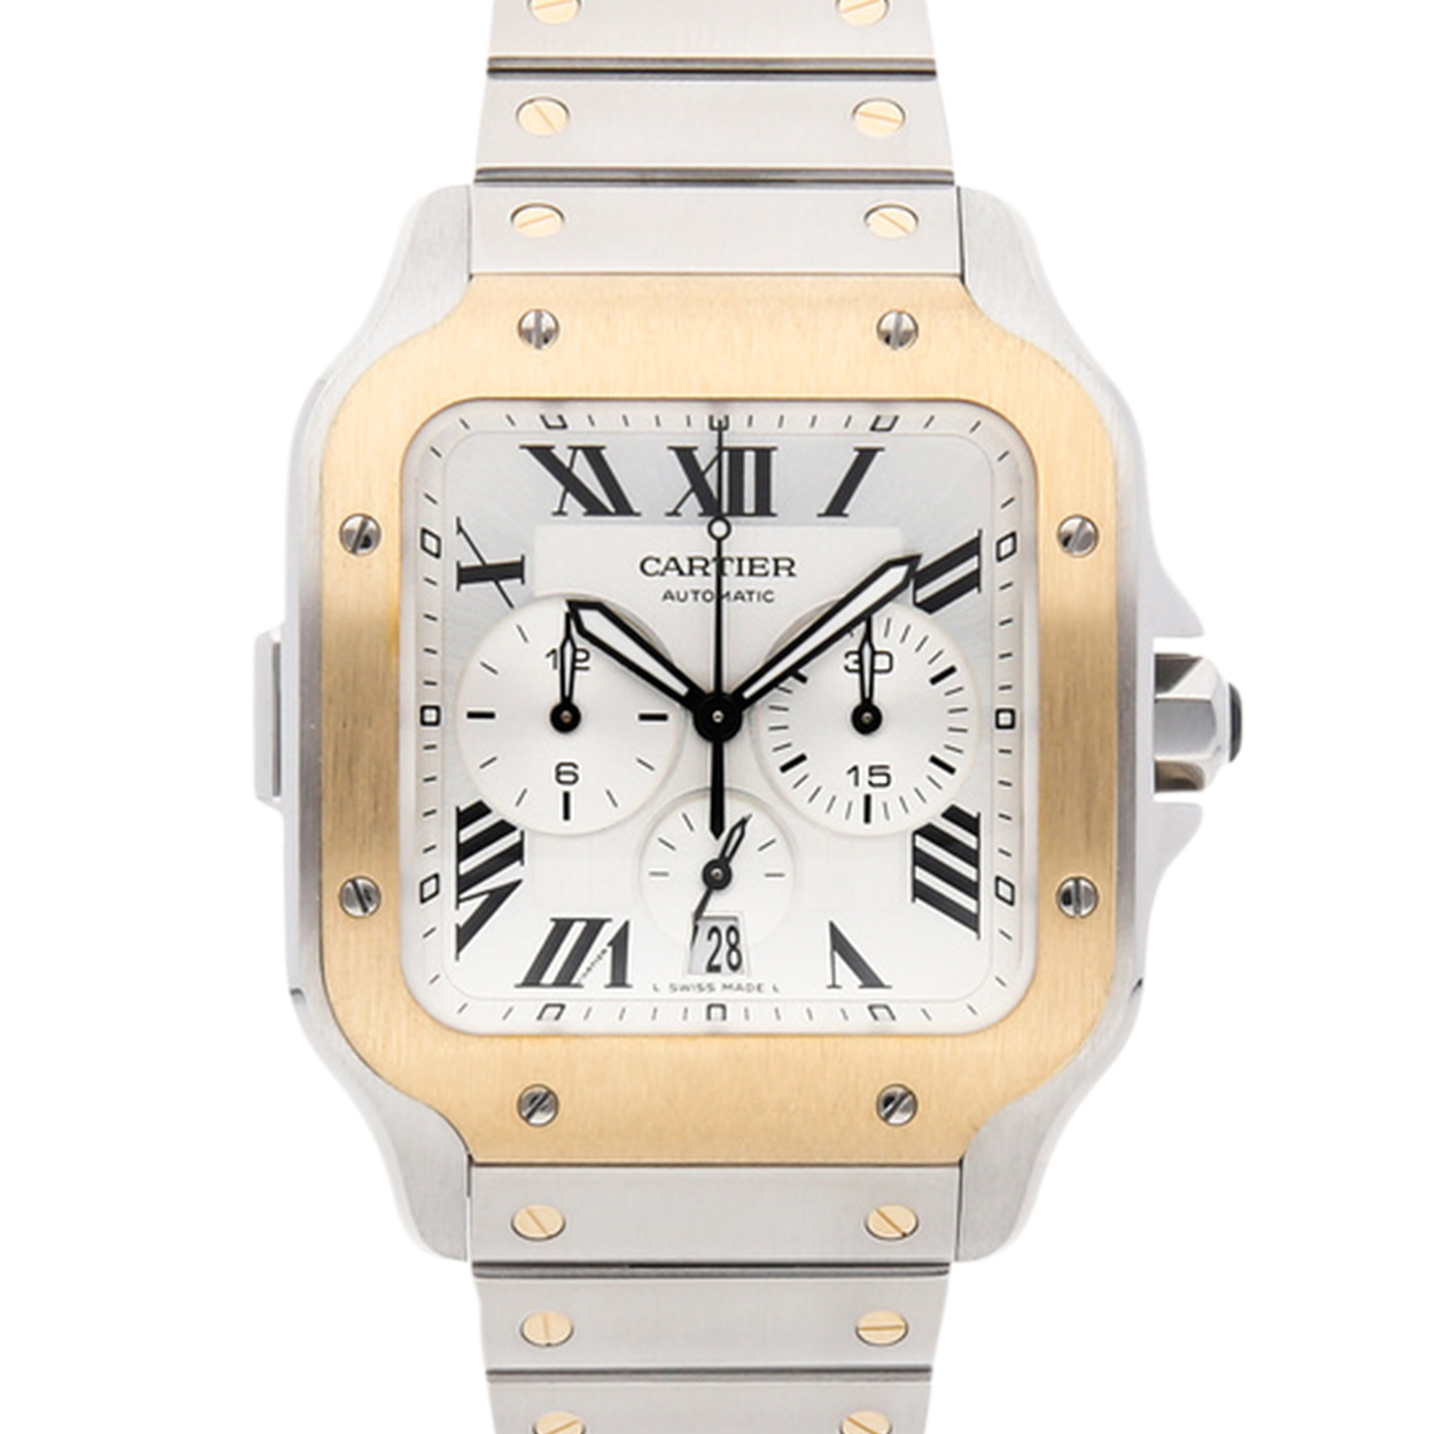 how much is my cartier watch worth